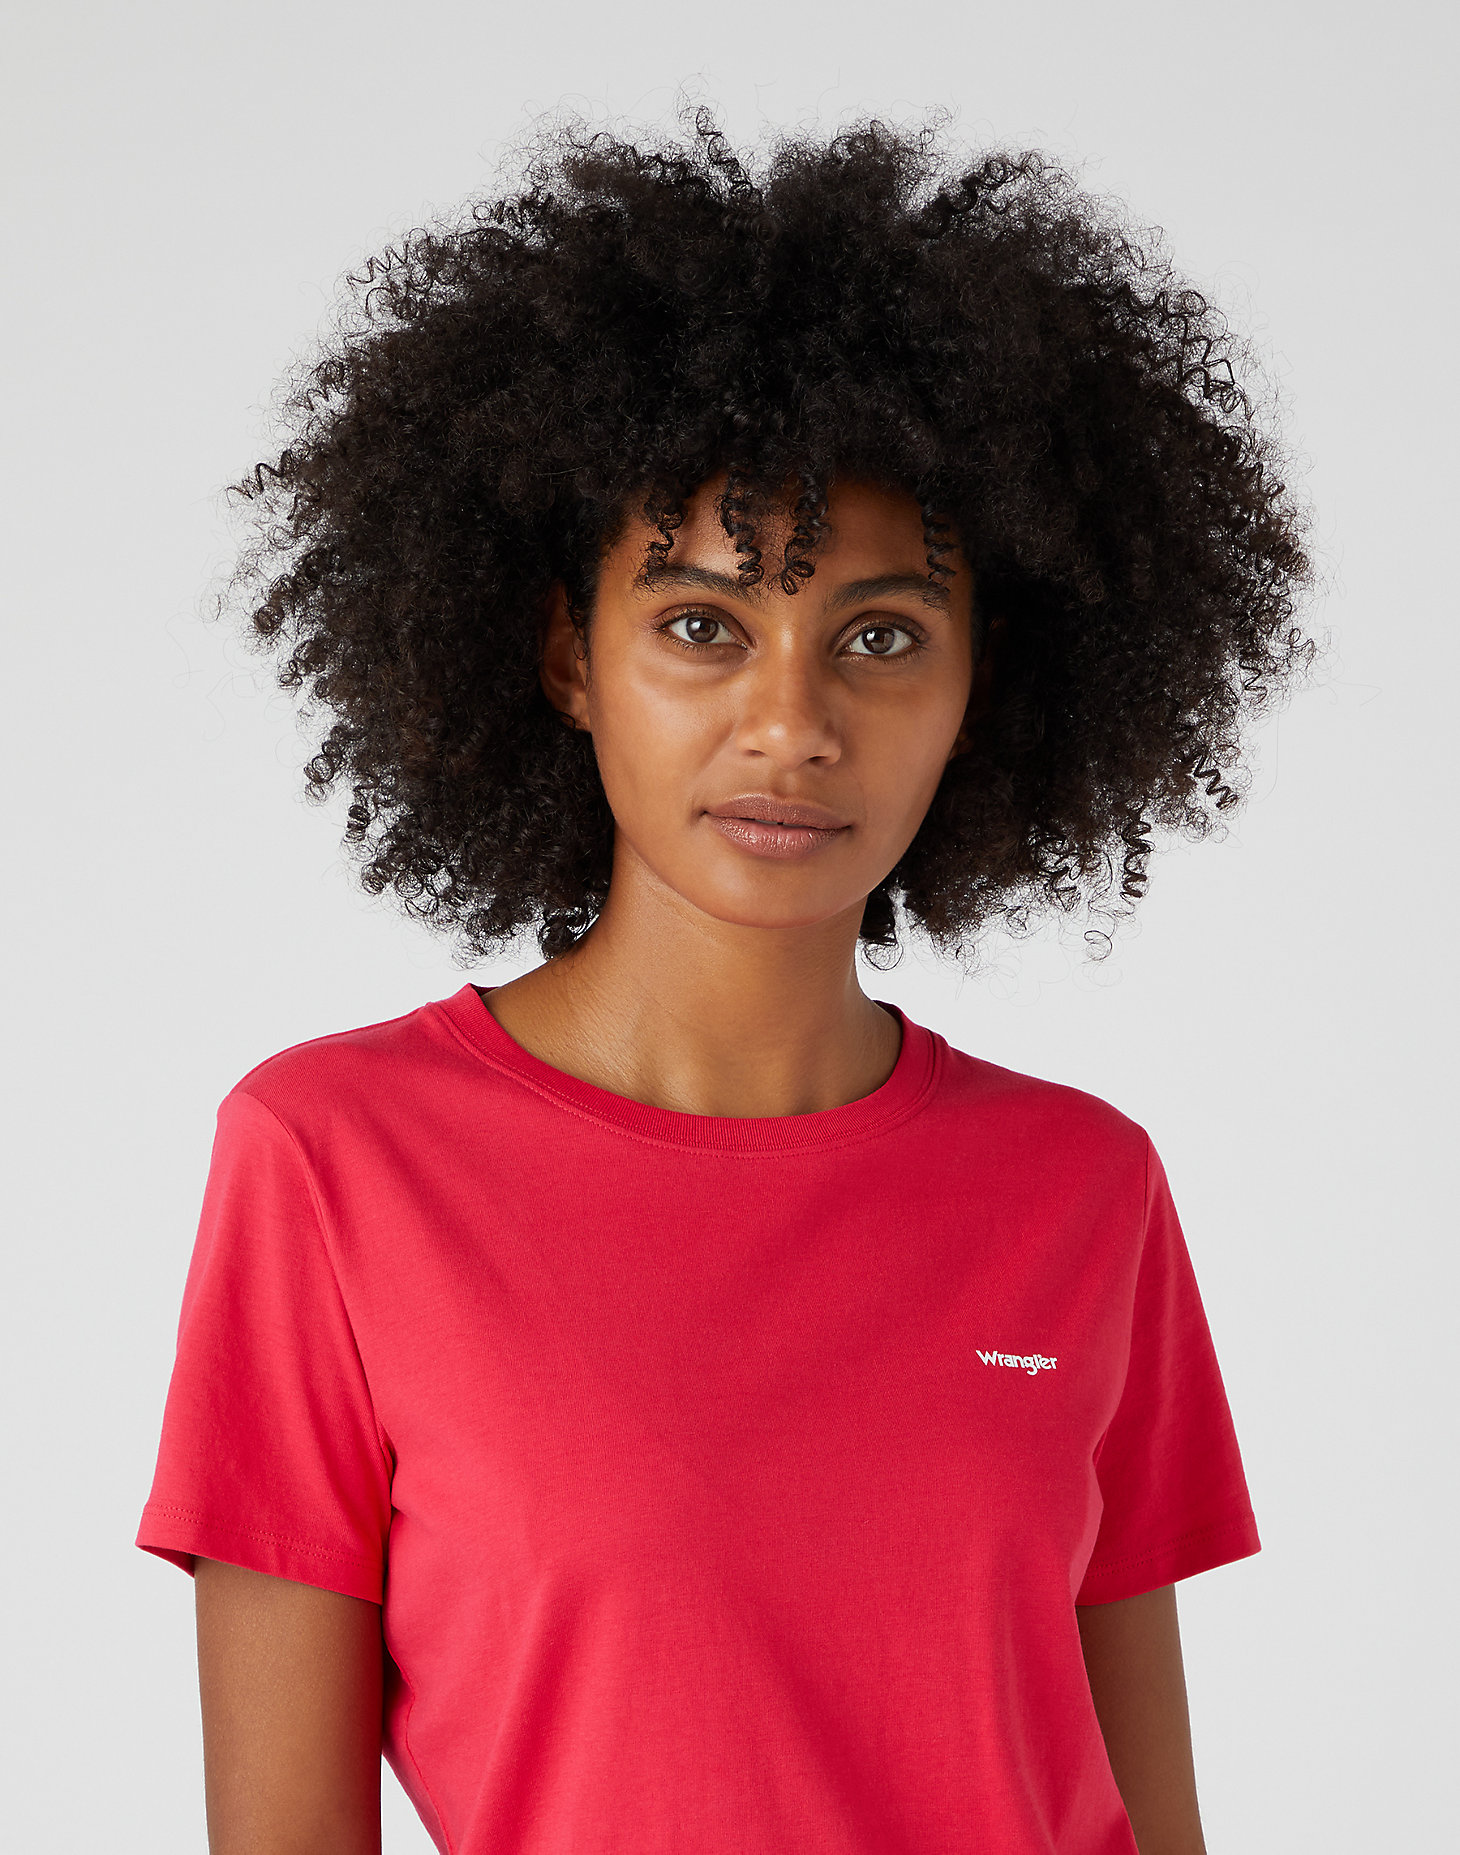 Logo Tee in Rose Red alternative view 3